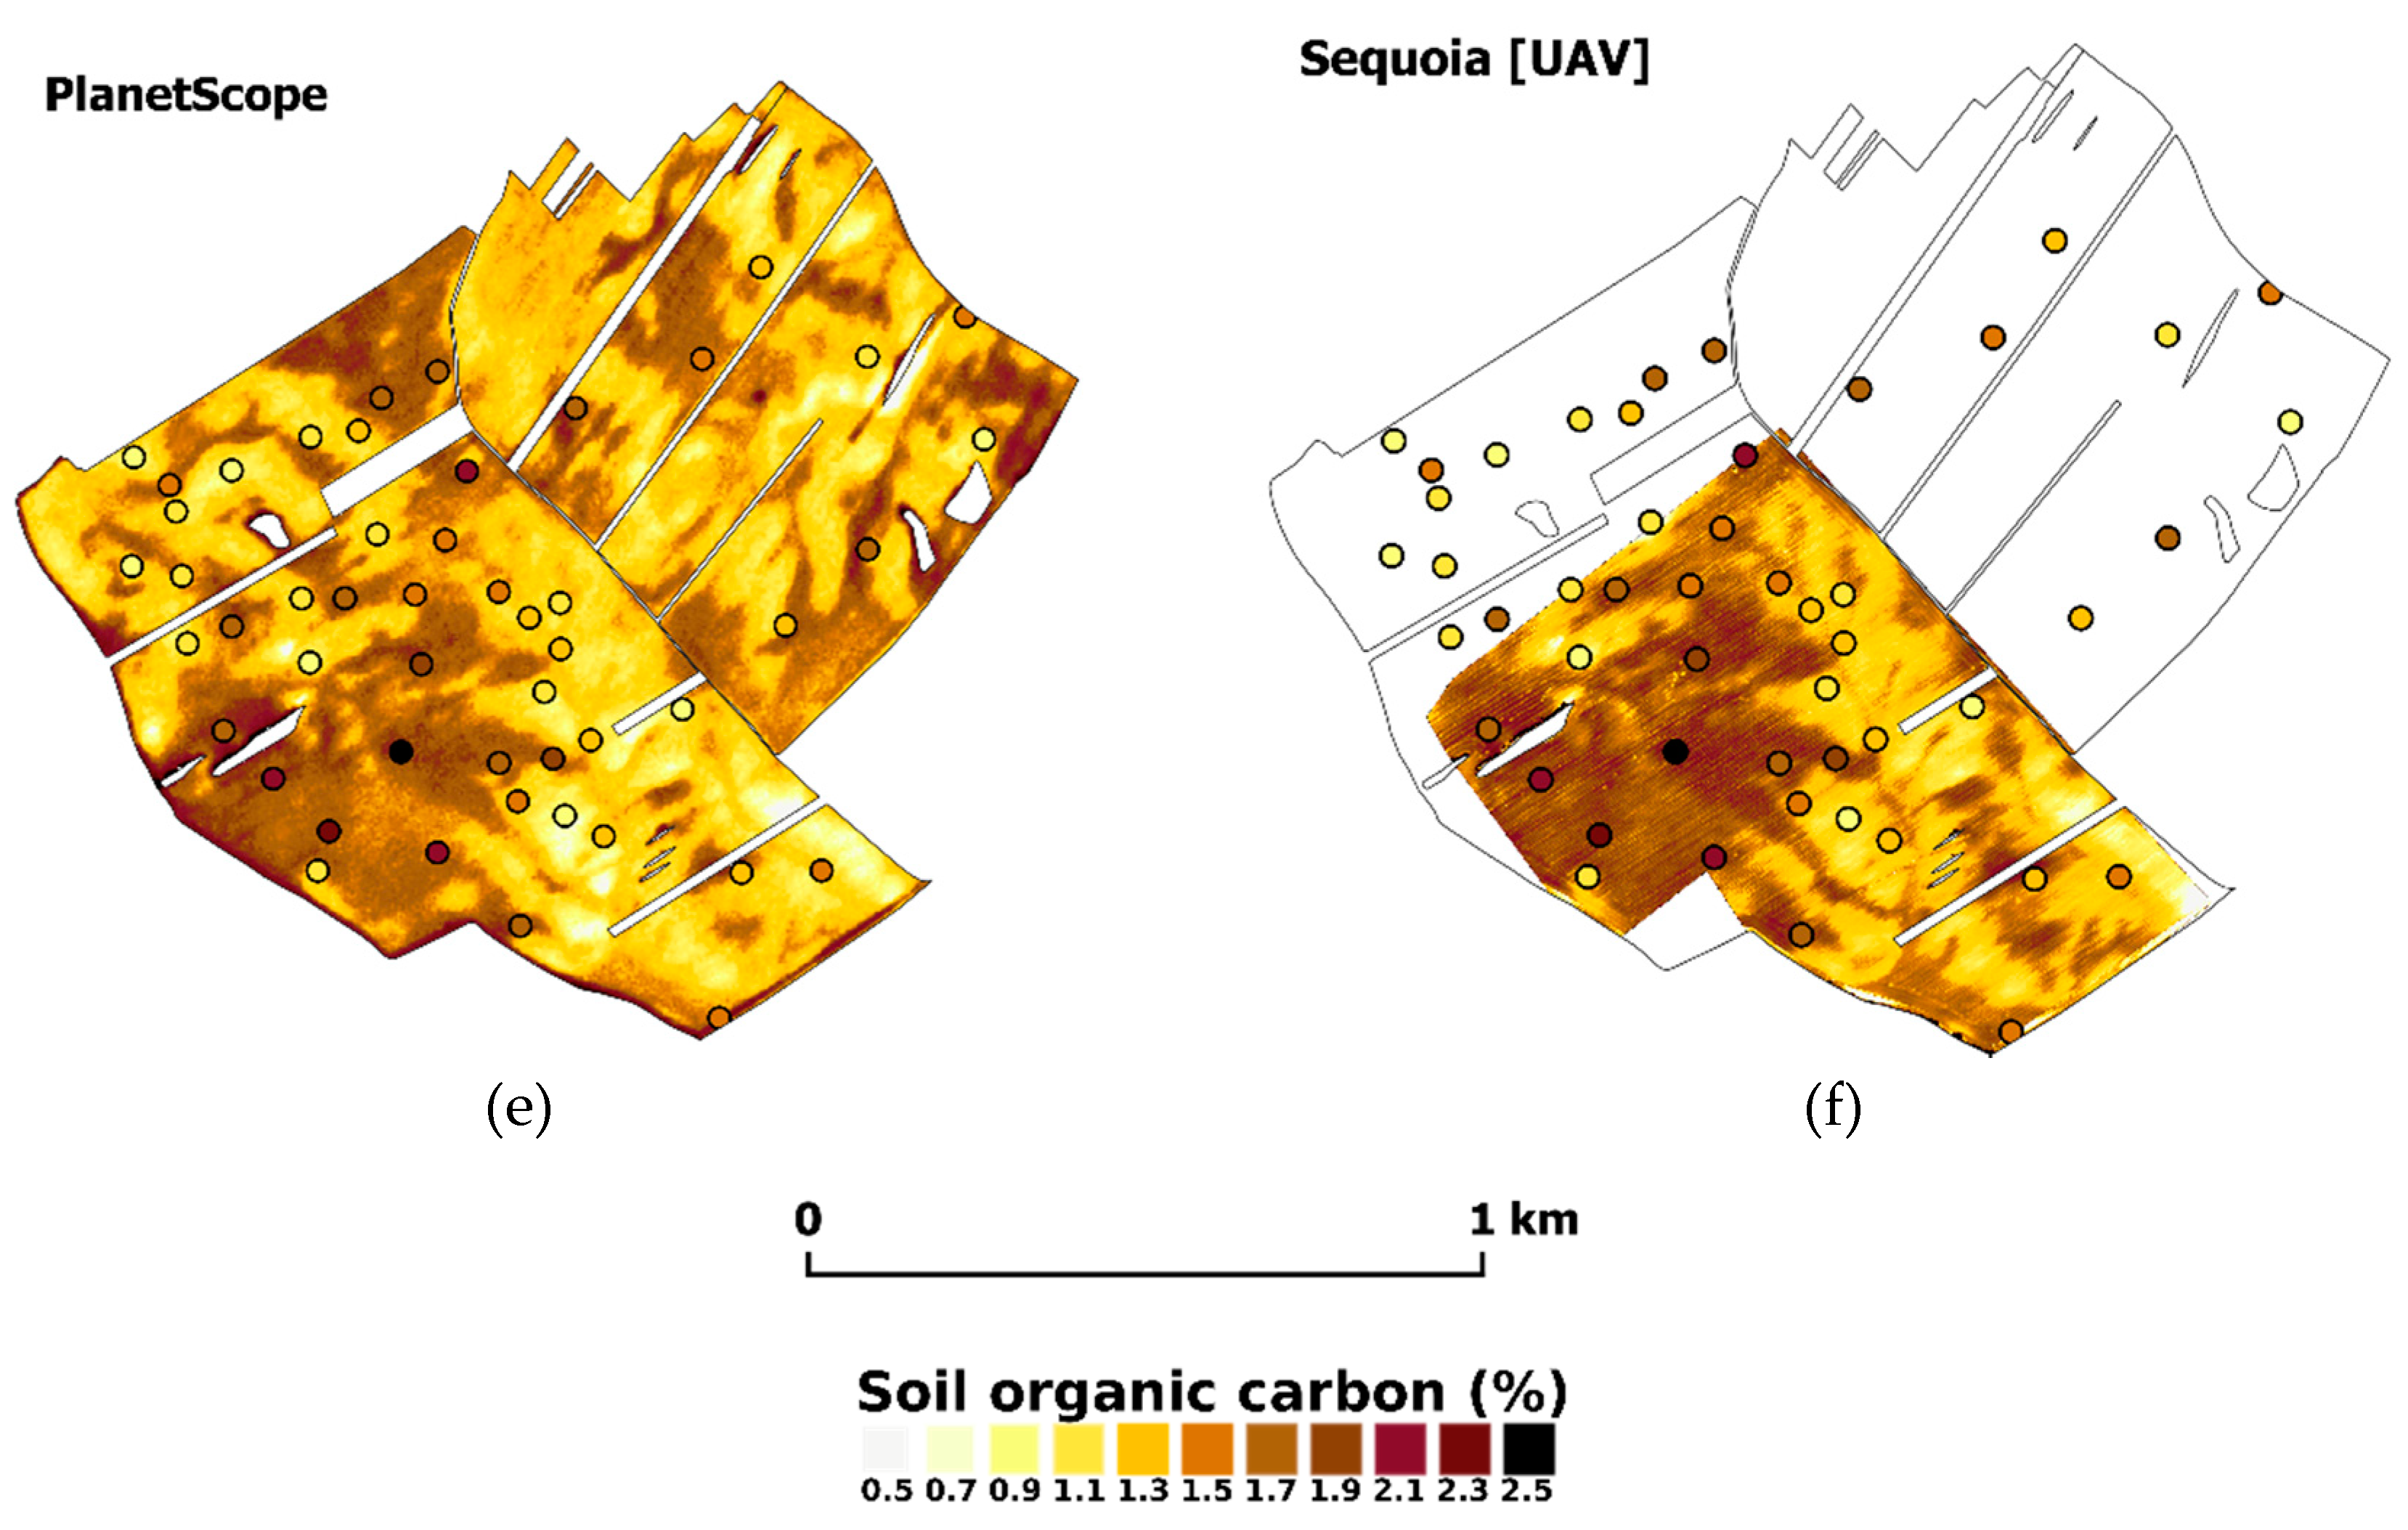 Remote Sensing | Free Full-Text | Soil Organic Carbon Mapping Using  Multispectral Remote Sensing Data: Prediction Ability of Data with  Different Spatial and Spectral Resolutions